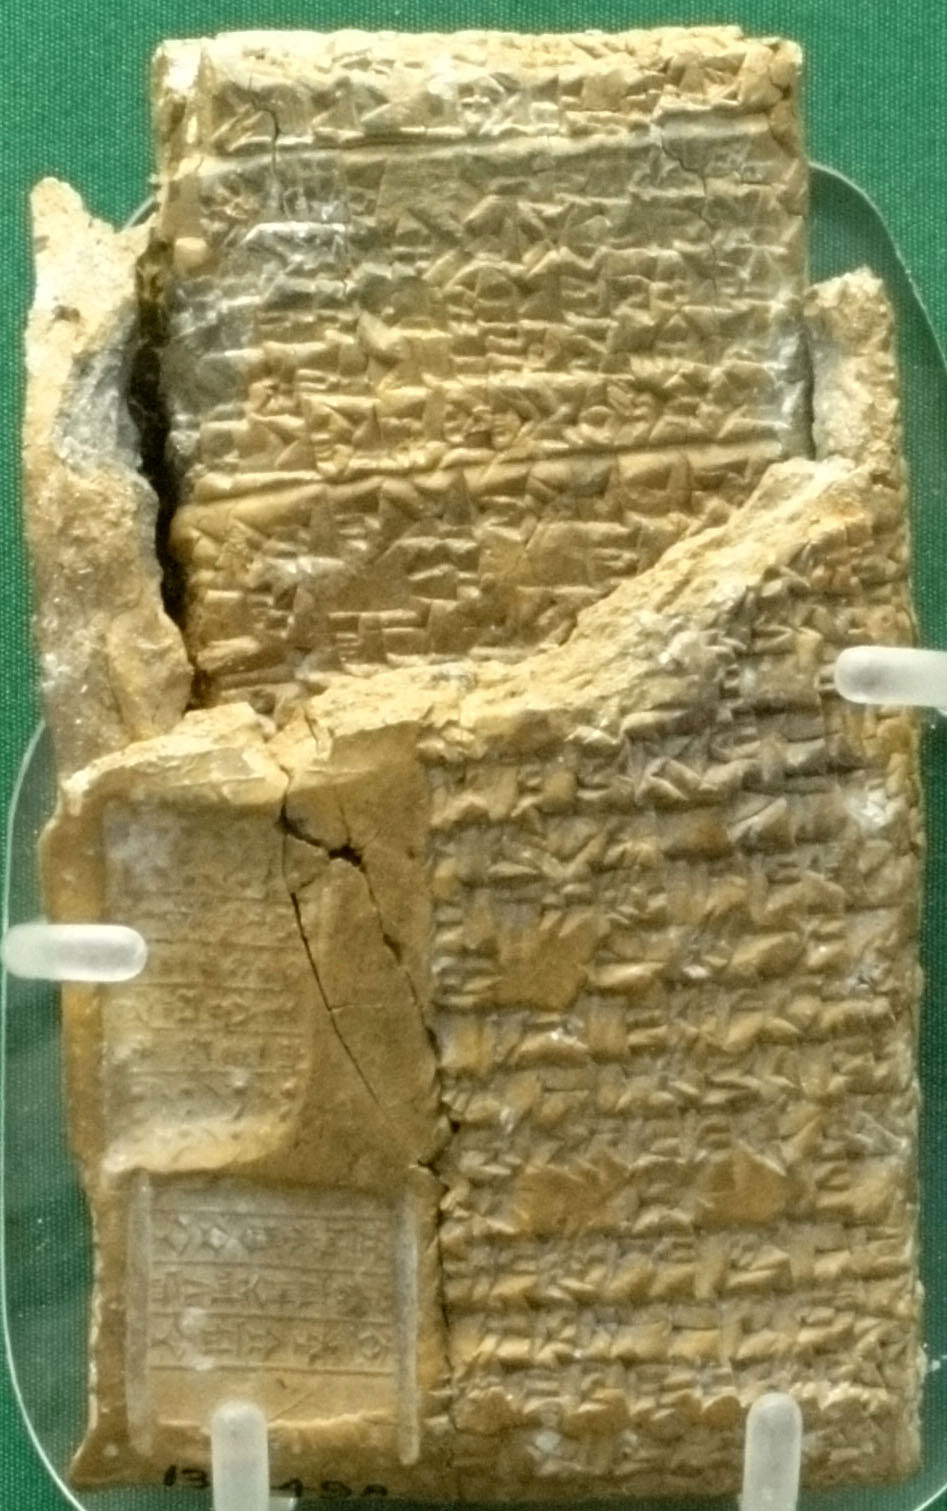 A tan-yellow clay enclosure with cuneiform writing on it has been broken and part of the top removed to reveal a clay tablet inside. Both the enclosure and the tablet are engraved with cuneiform writing.